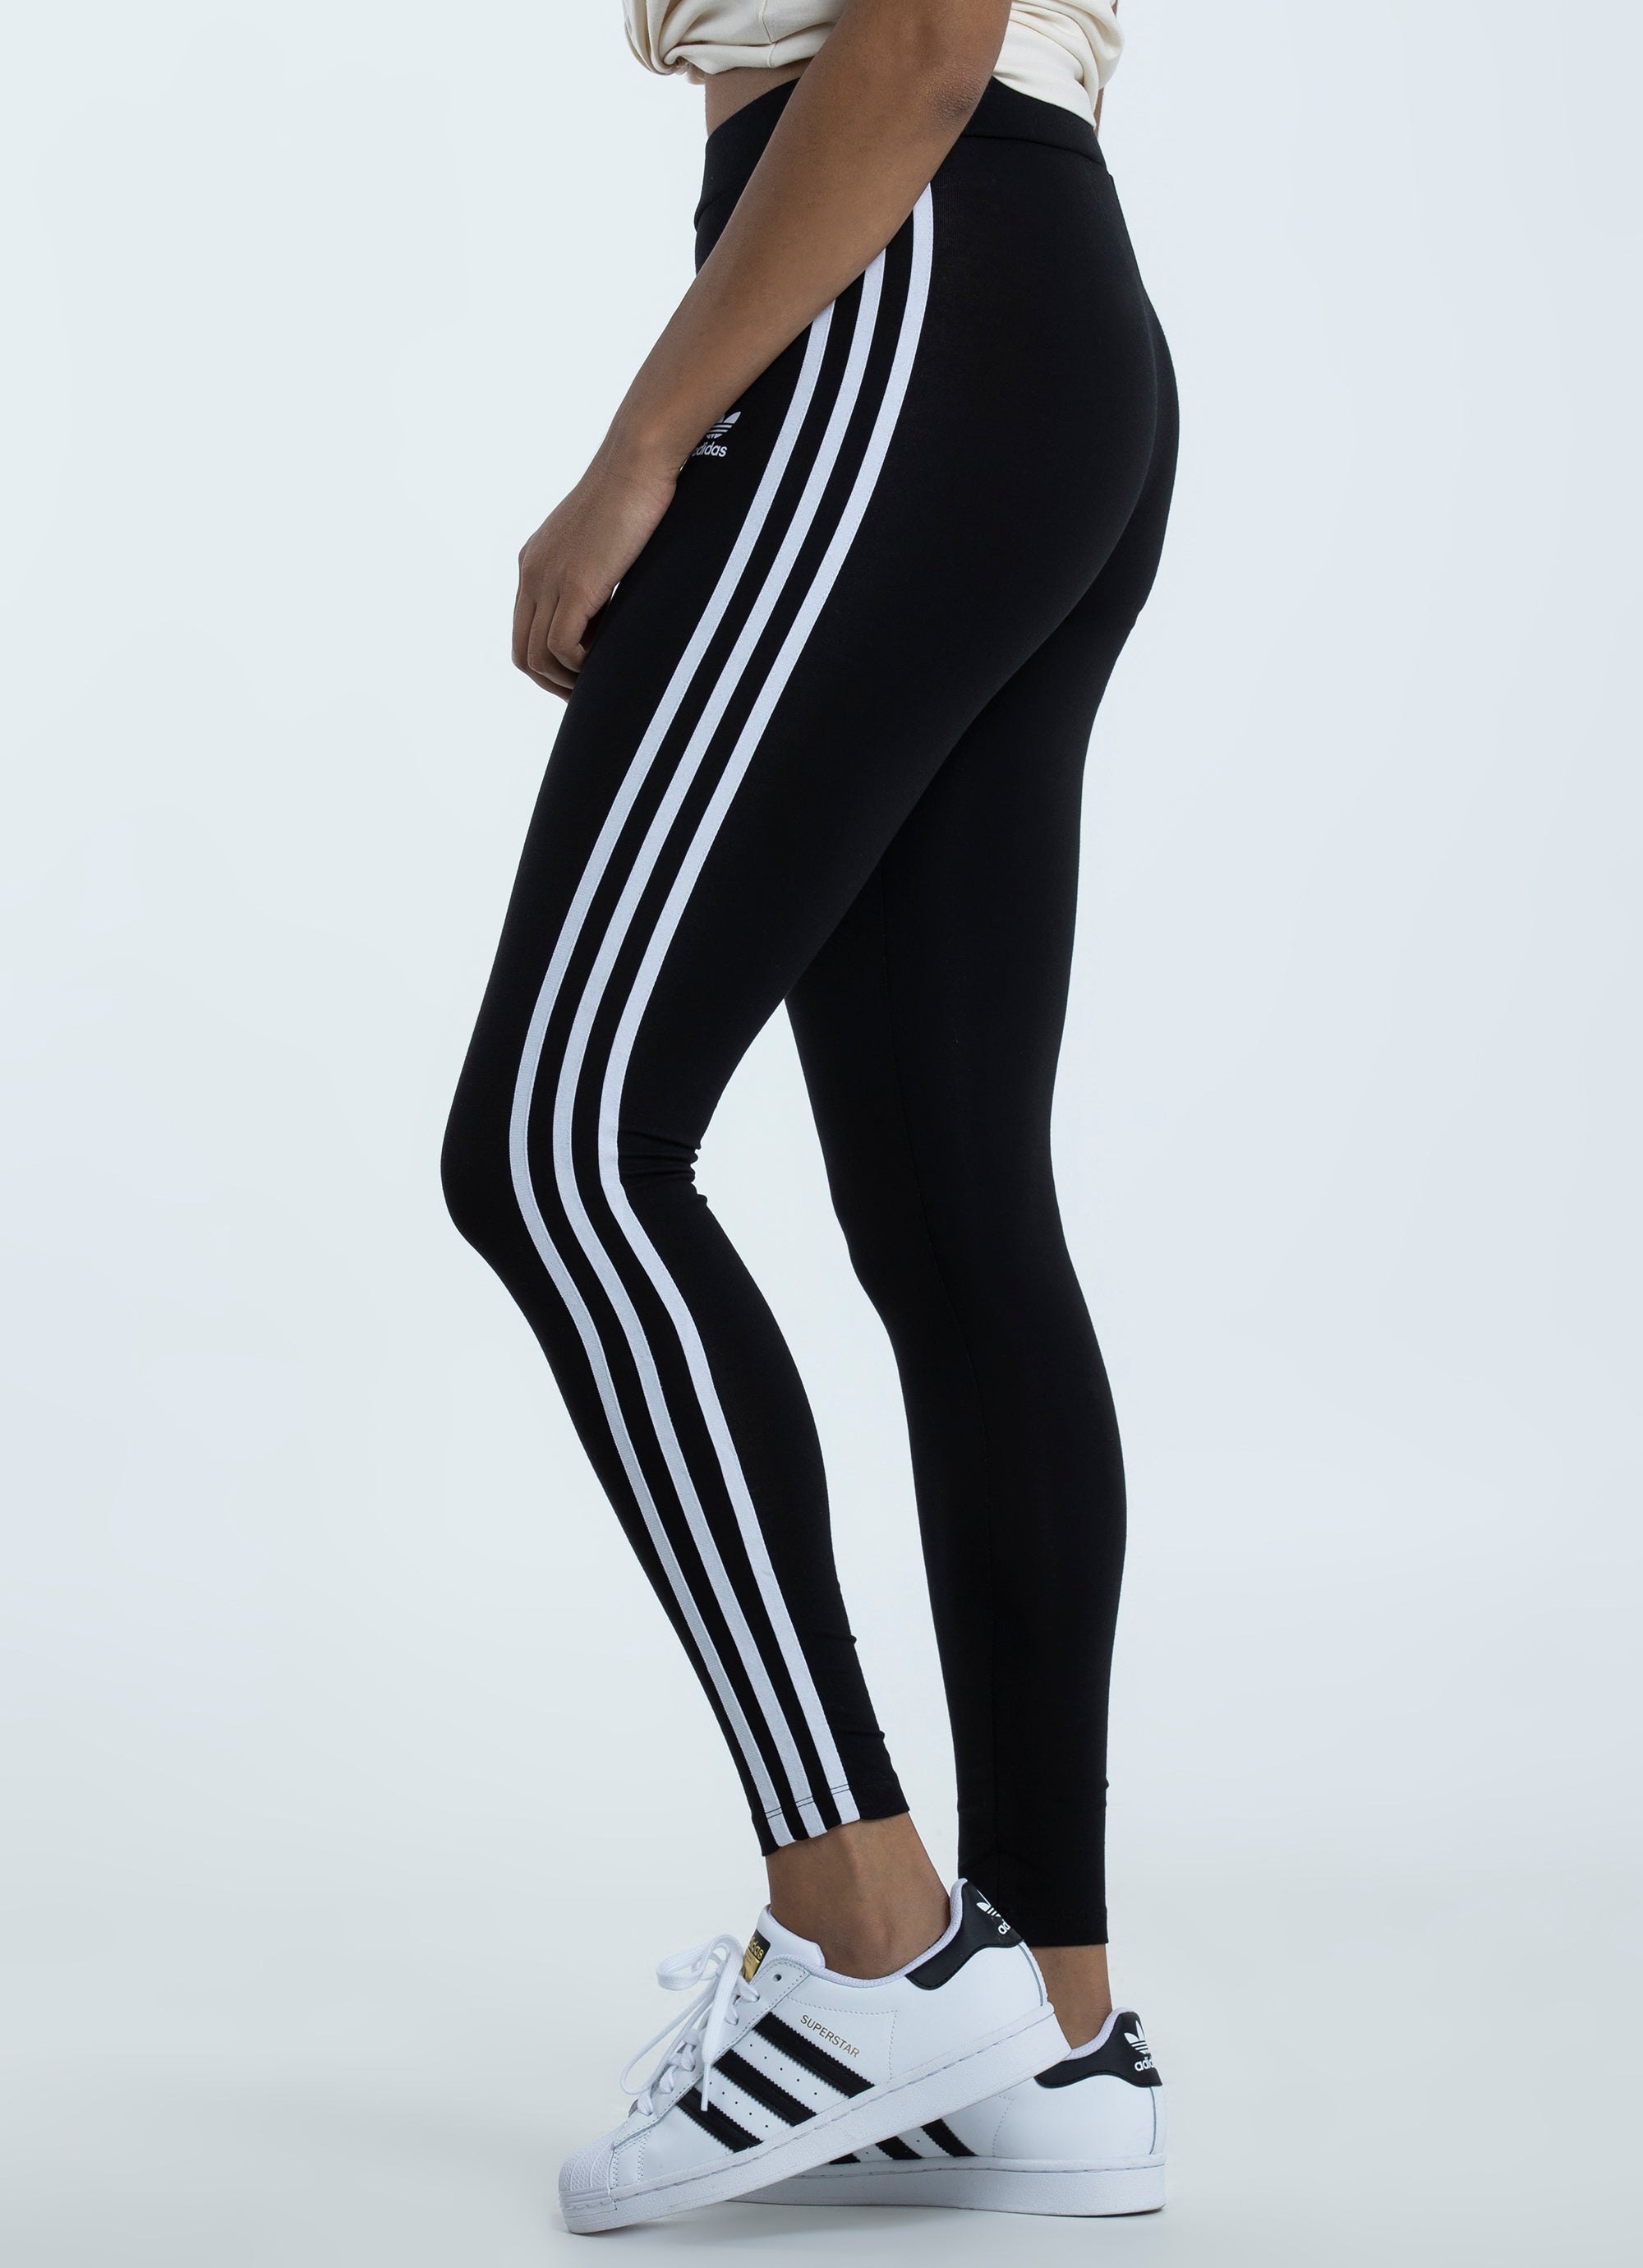 adidas Women's Tech-Fit Long Compression Tights - Black | littlewoods.com